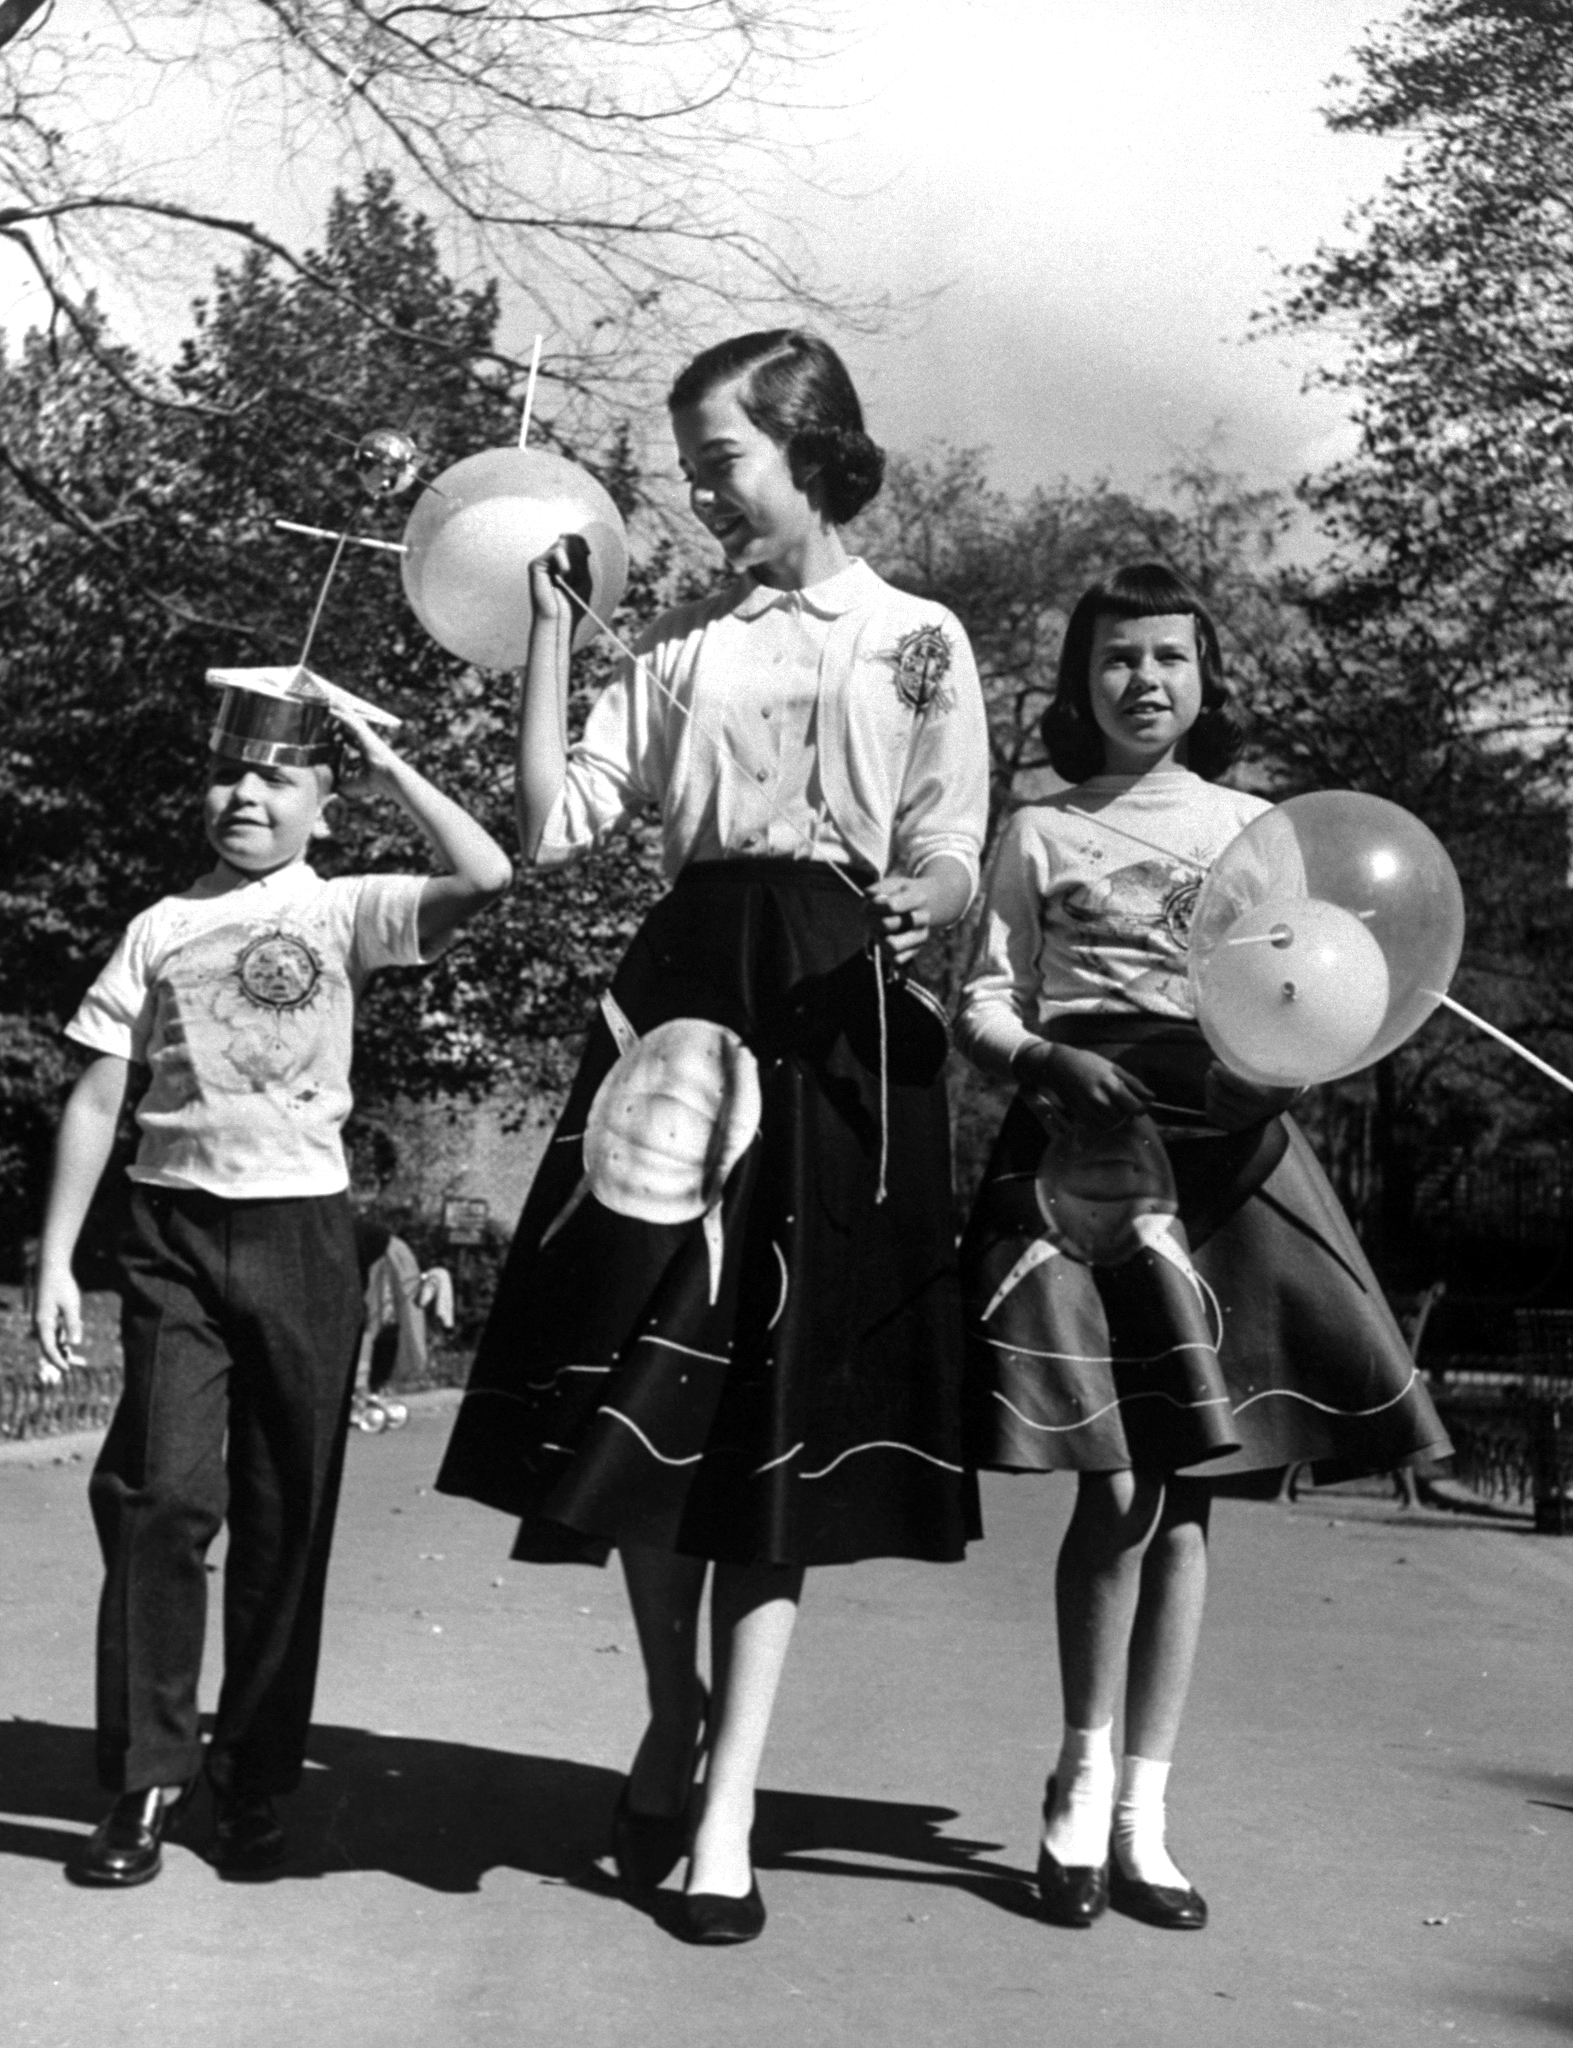 Space fashions rushed onto market include skirts, jackets, hats, balloons with satellite motif.